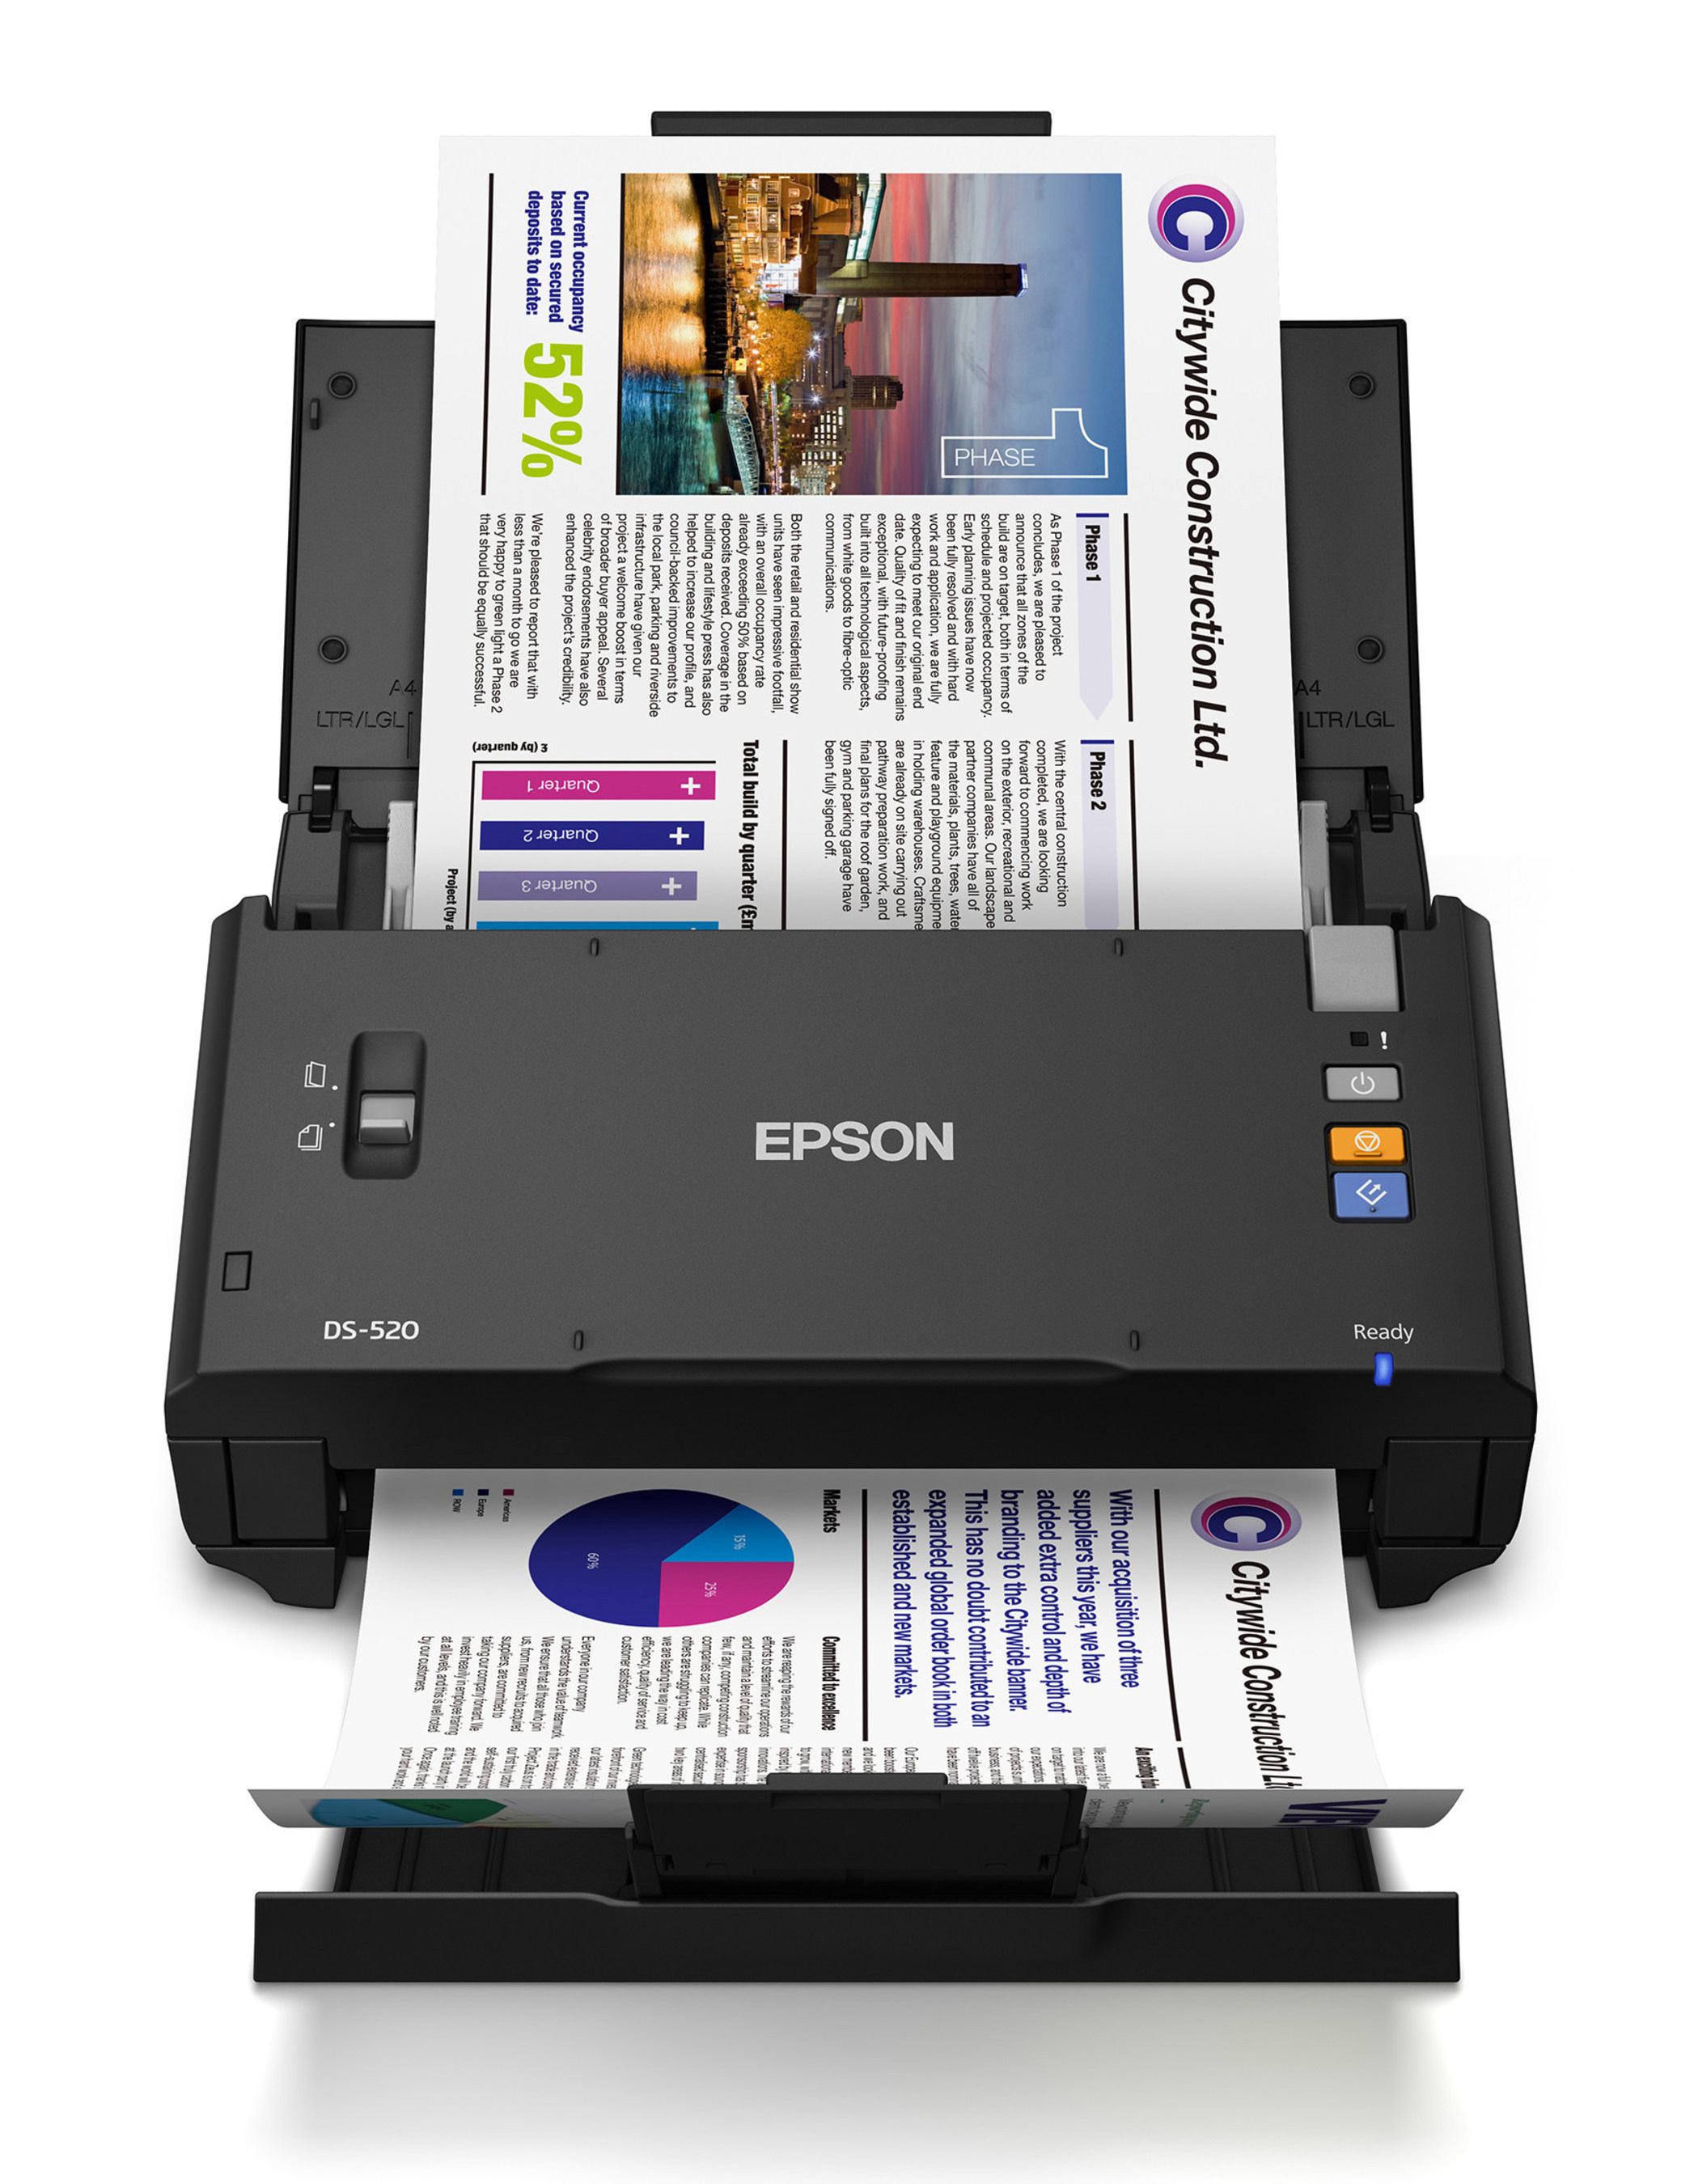 The WorkForce DS-520 sheet-fed scanner is the latest addition to Epson's lineup of professional-grade scanning solutions